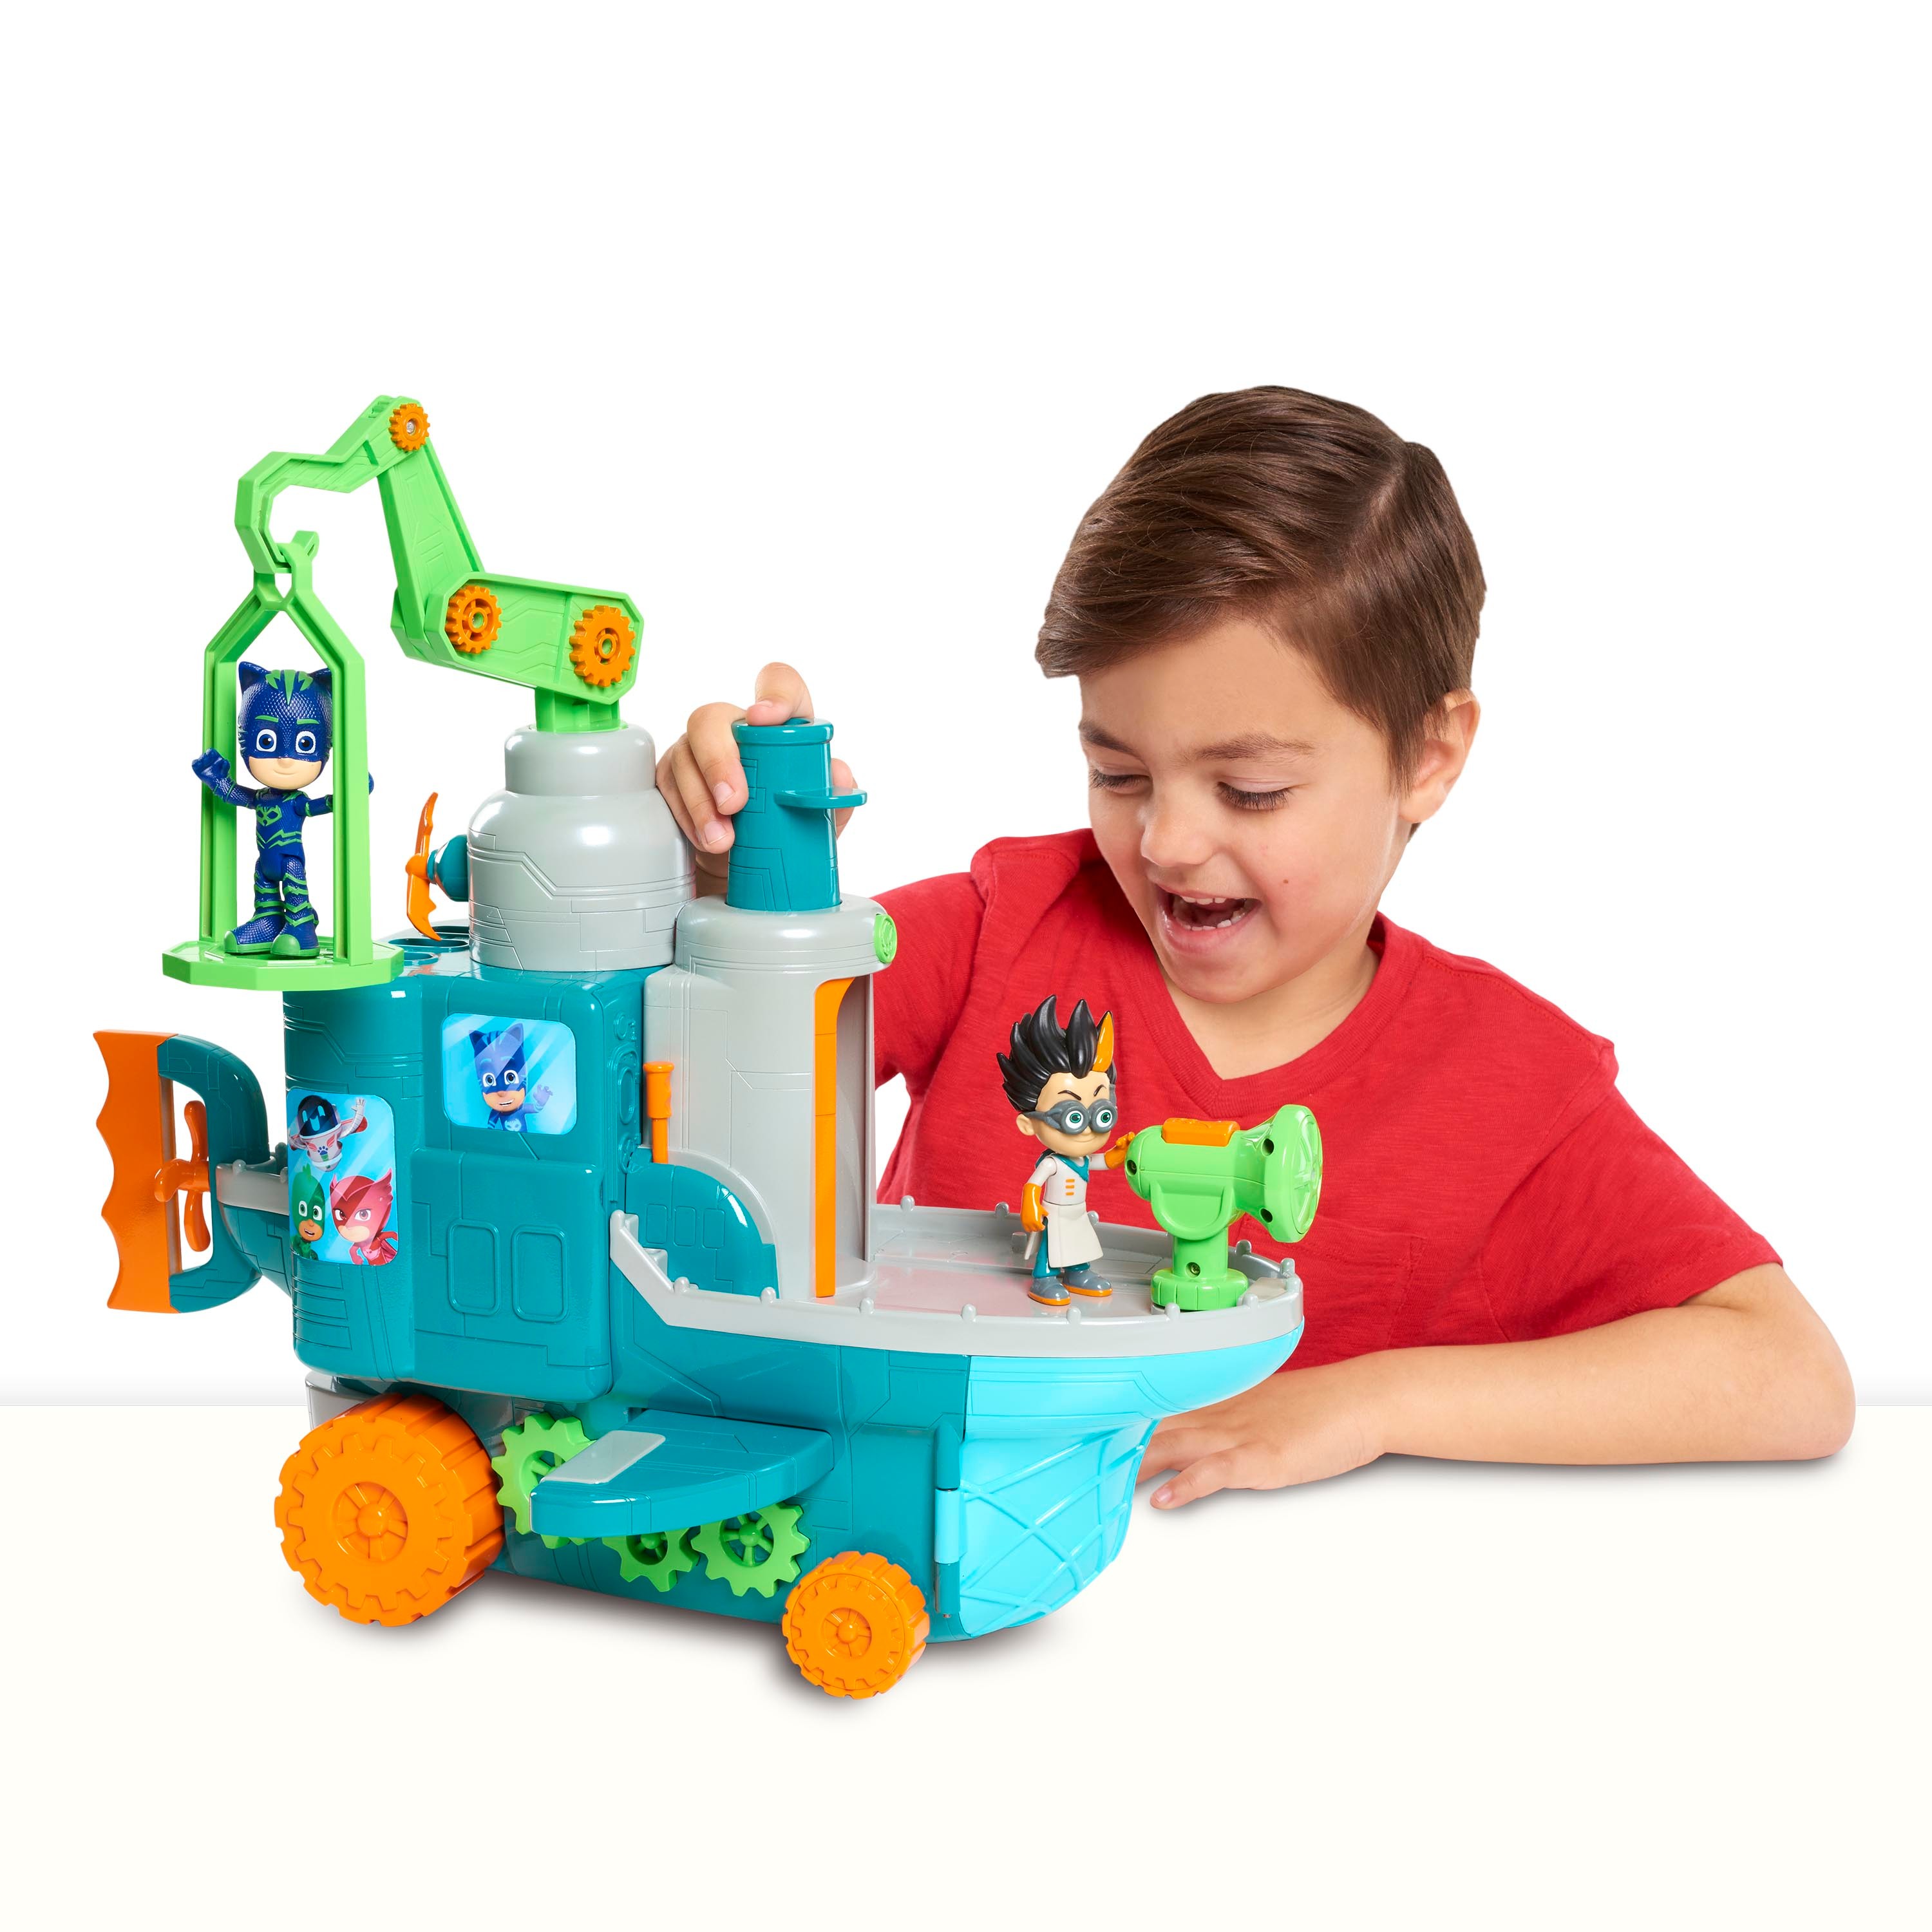 PJ Masks Romeo's Flying Factory Playset with Lights, Sounds, and Secret Compartment,  Kids Toys for Ages 3 Up, Gifts and Presents - image 3 of 7